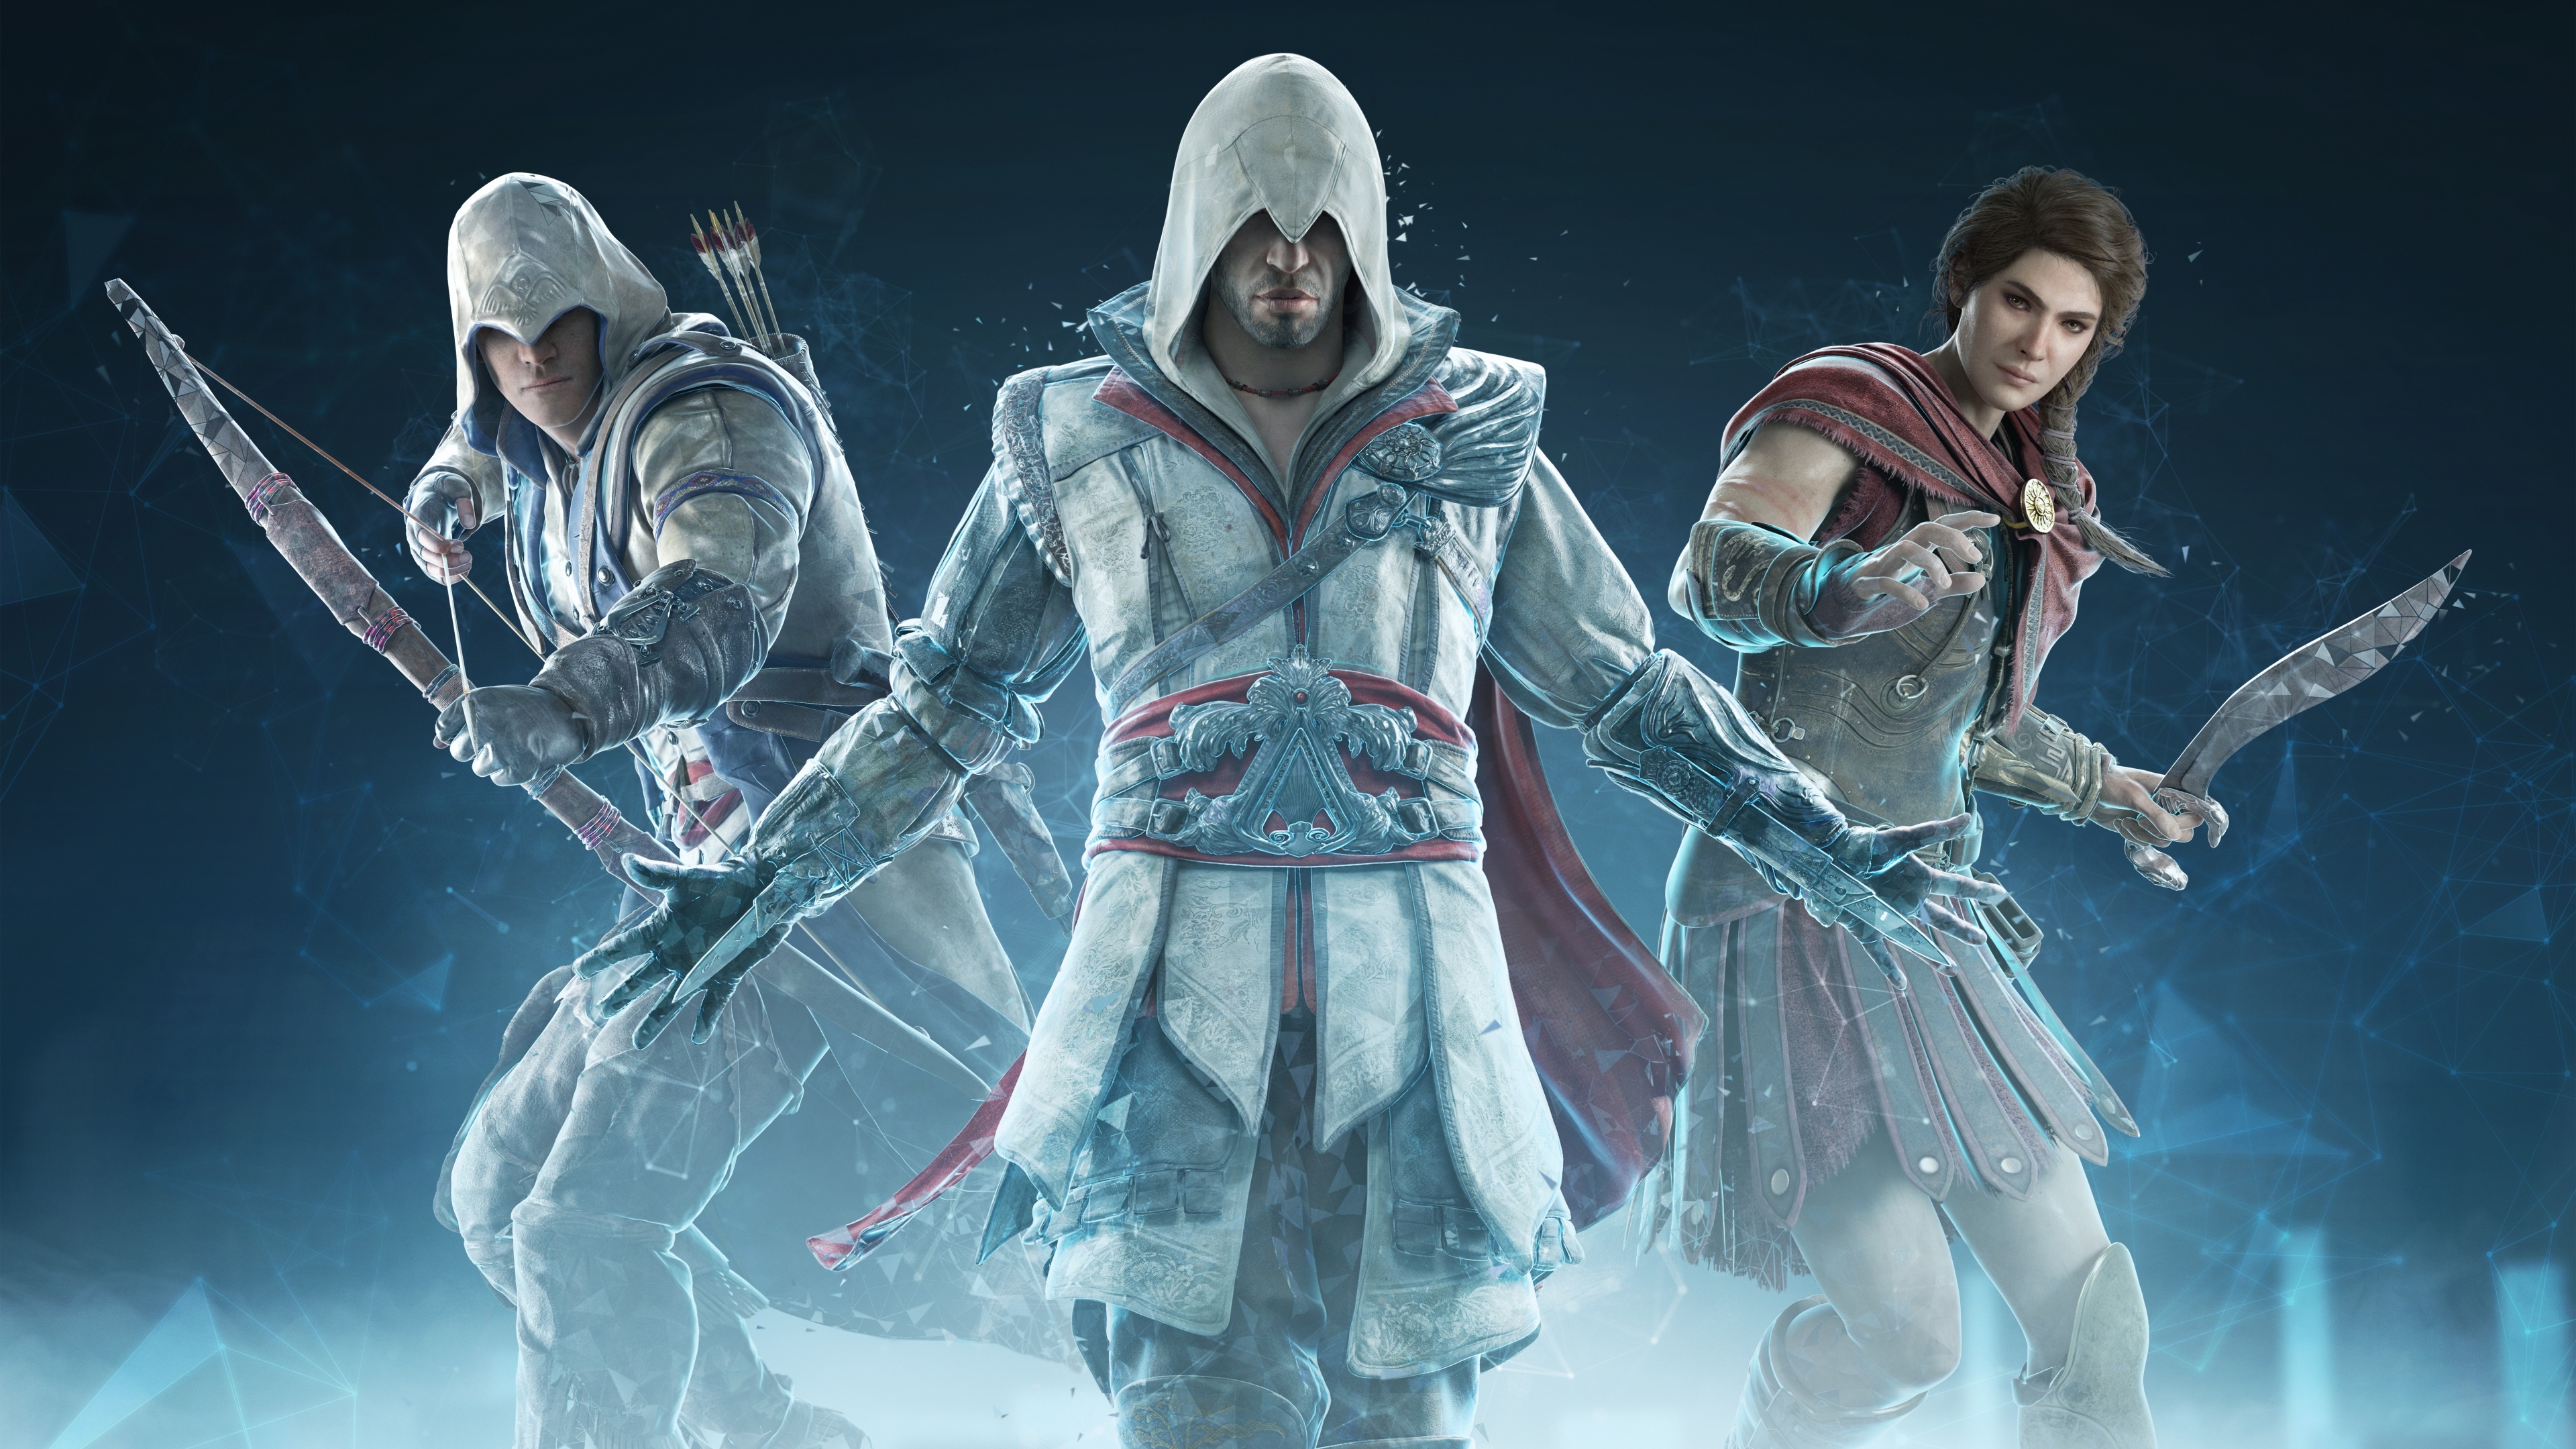 Assassins Creed III Wallpapers HD Assassins Creed III Backgrounds Free  Images Download